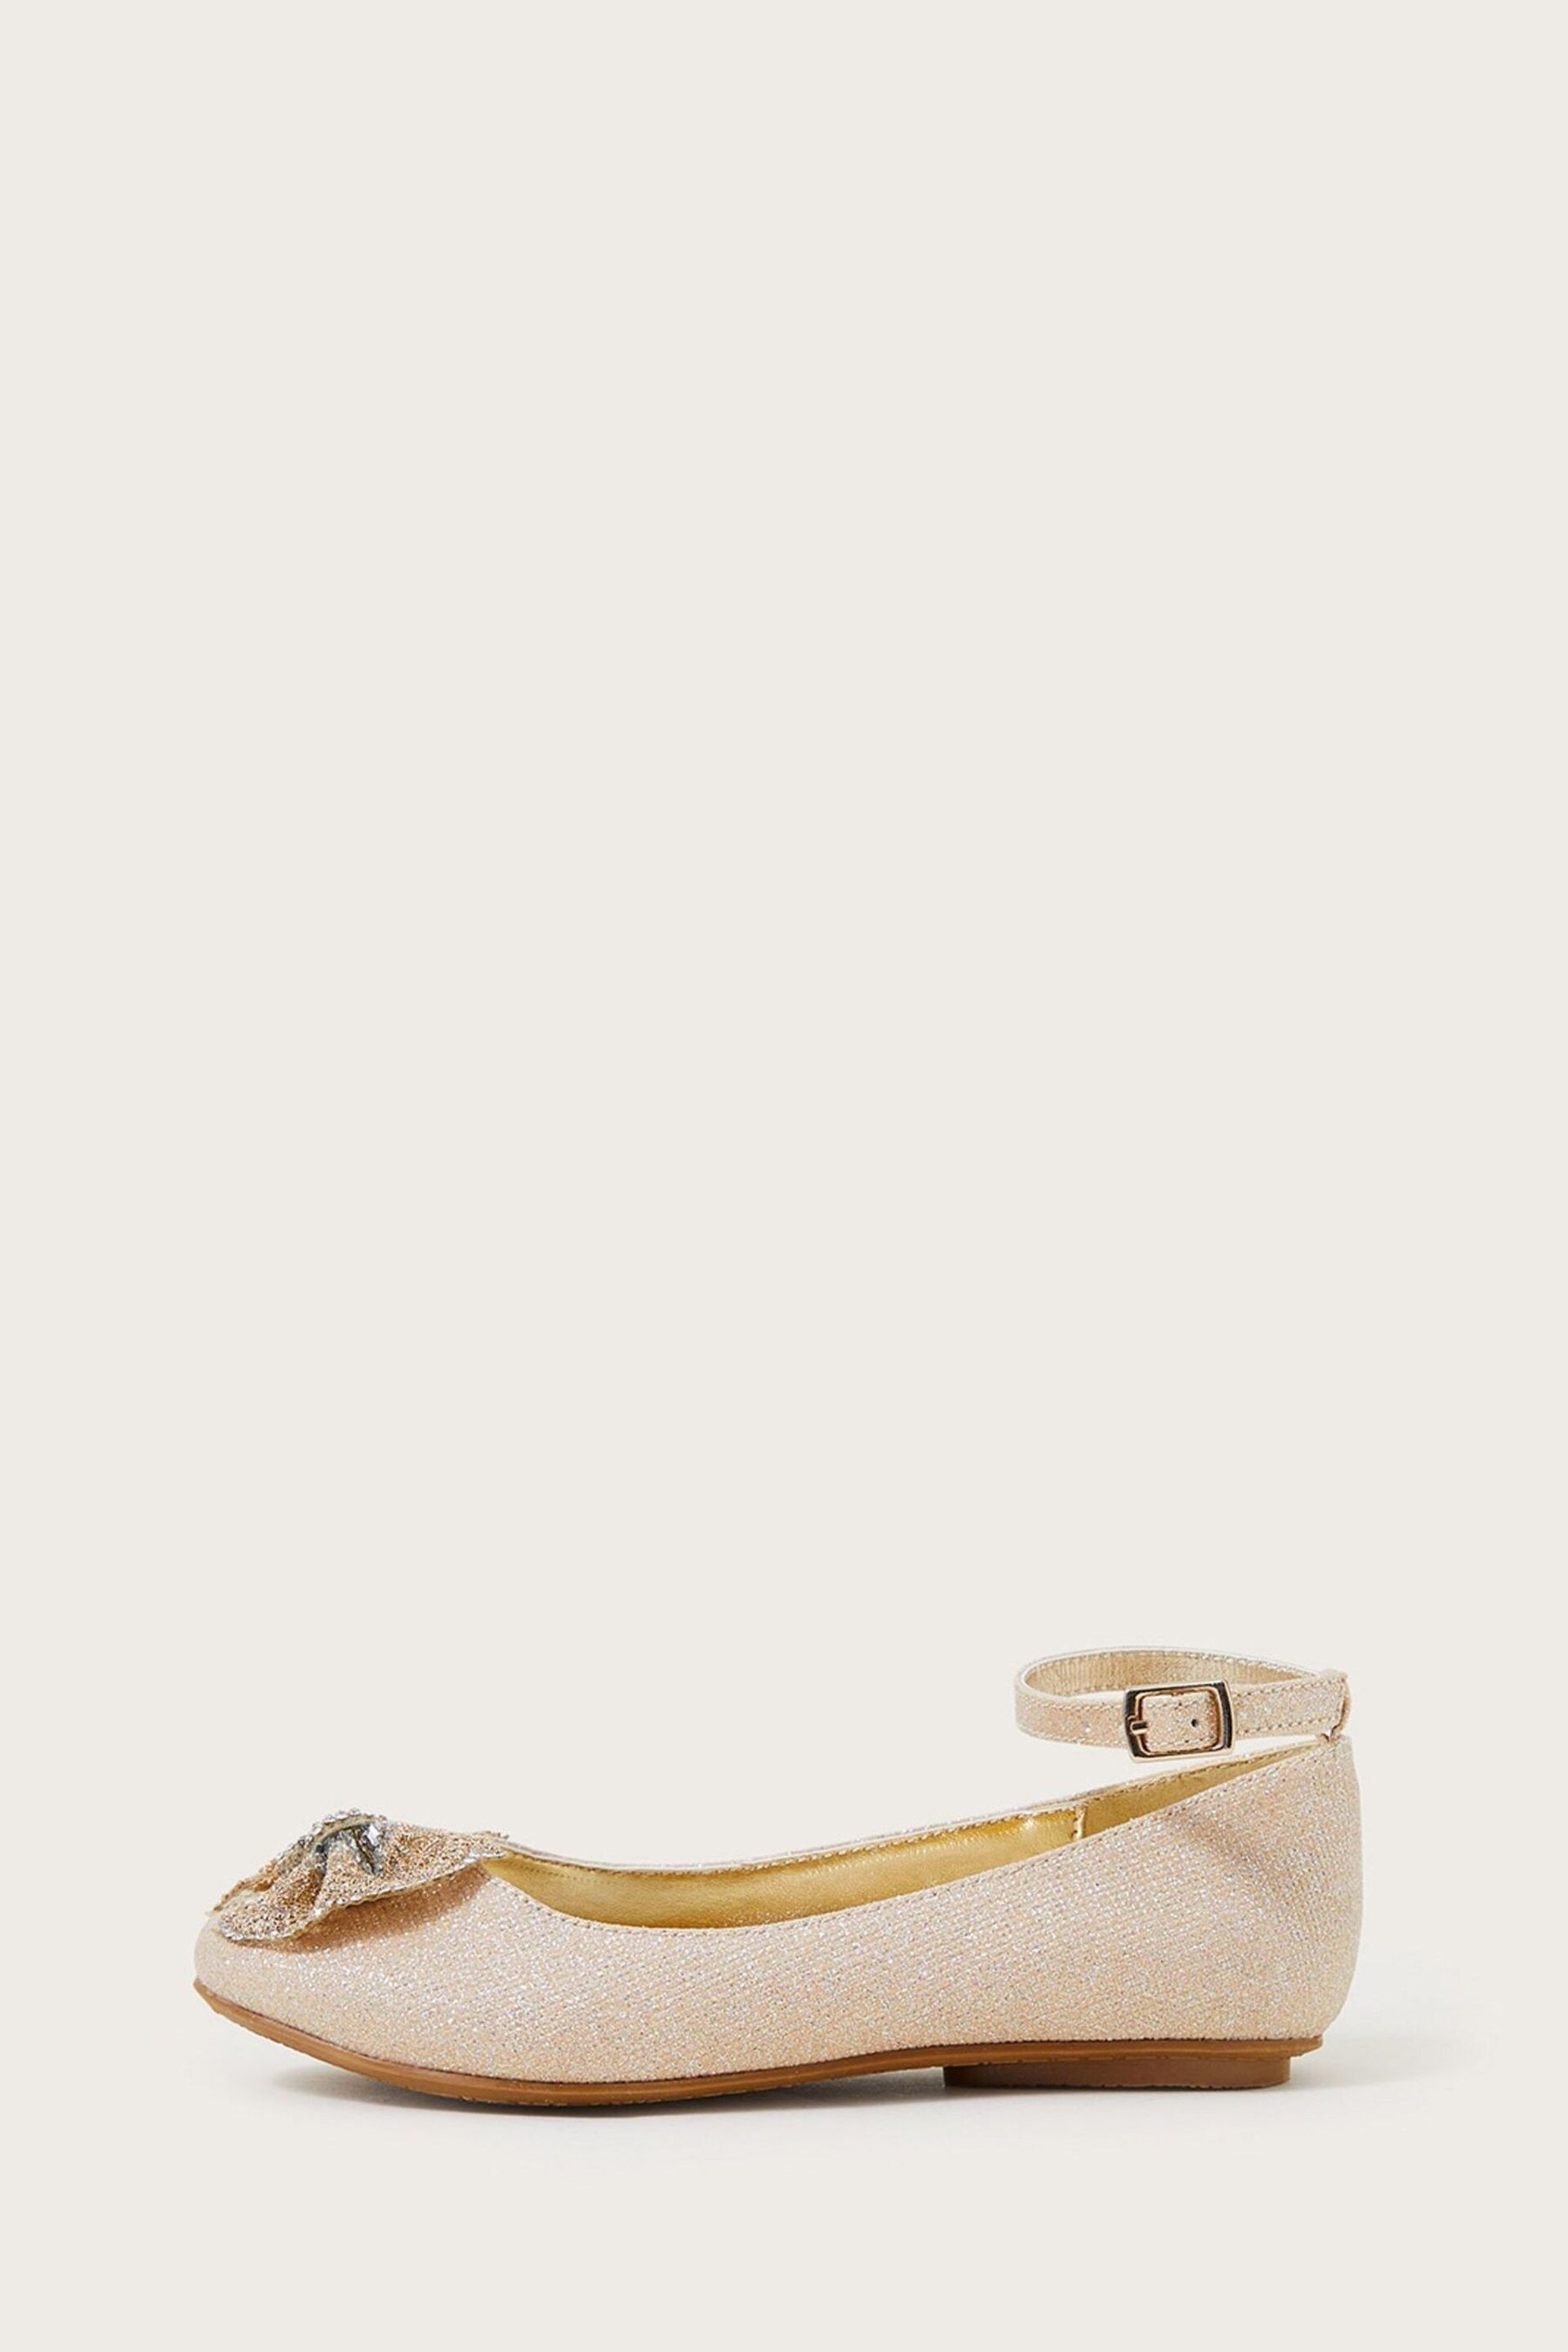 Monsoon Gold Polly Shimmer Bow Ballerina Flats - Image 1 of 3